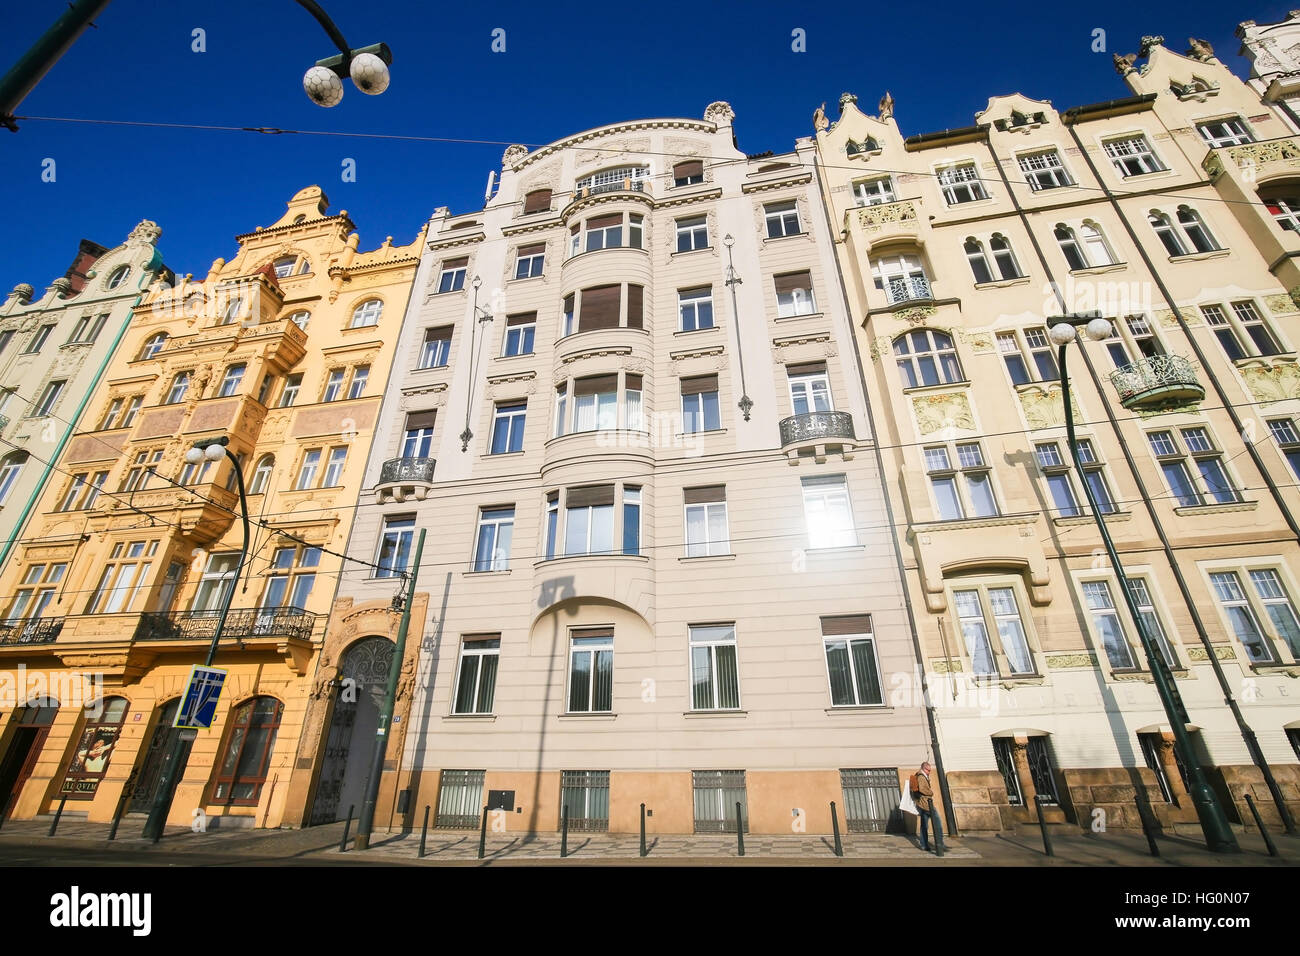 Typical architecture of Nove Mesto or New Town in Prague, Czech Republic Stock Photo